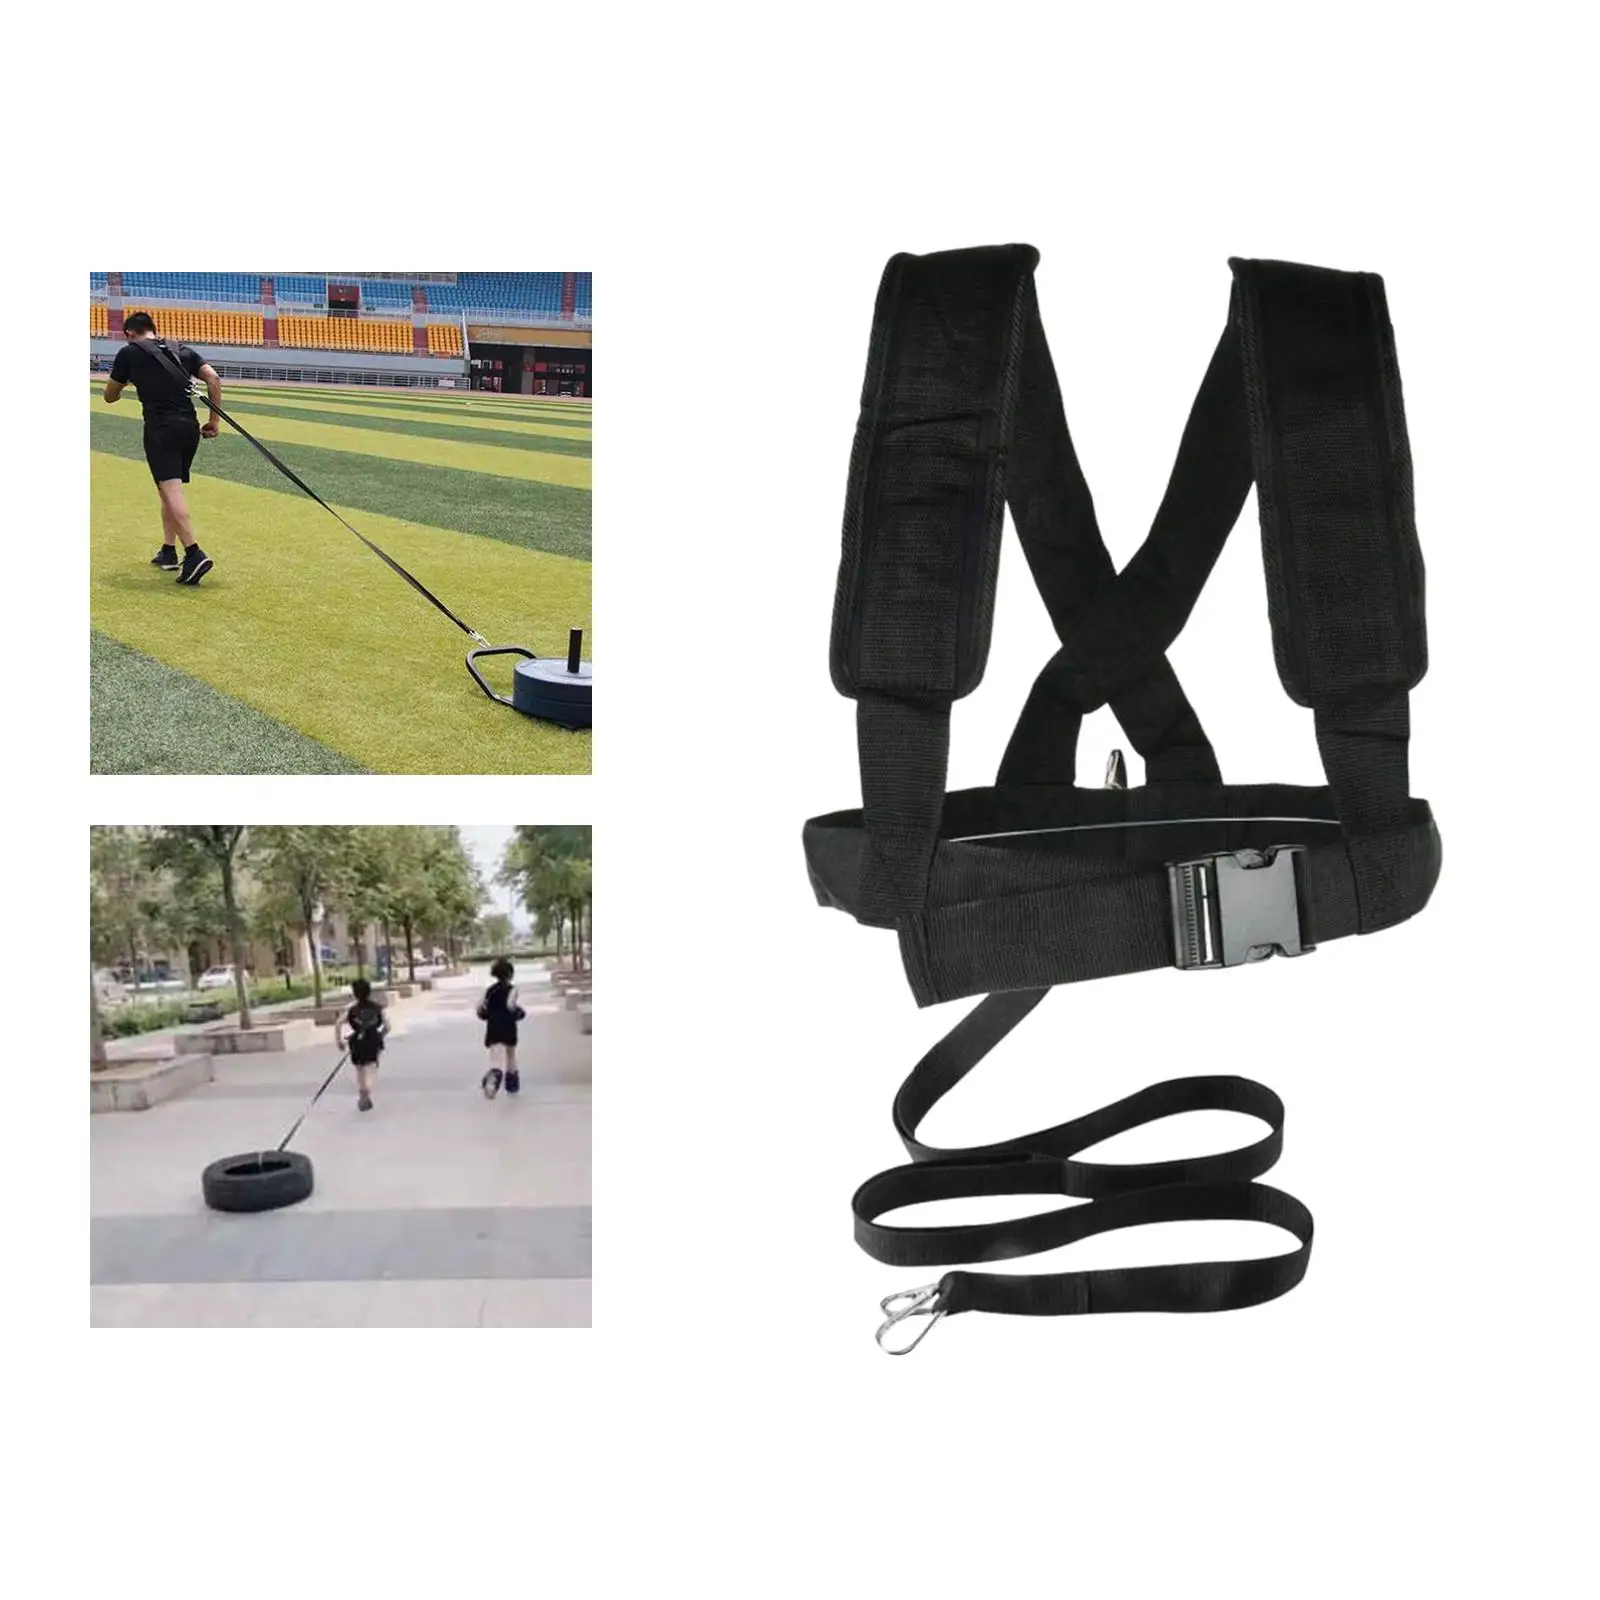 Sled Harness Tire Pulling Harness with Y Shape Strap Pull Strap Power Sled Workout Harness